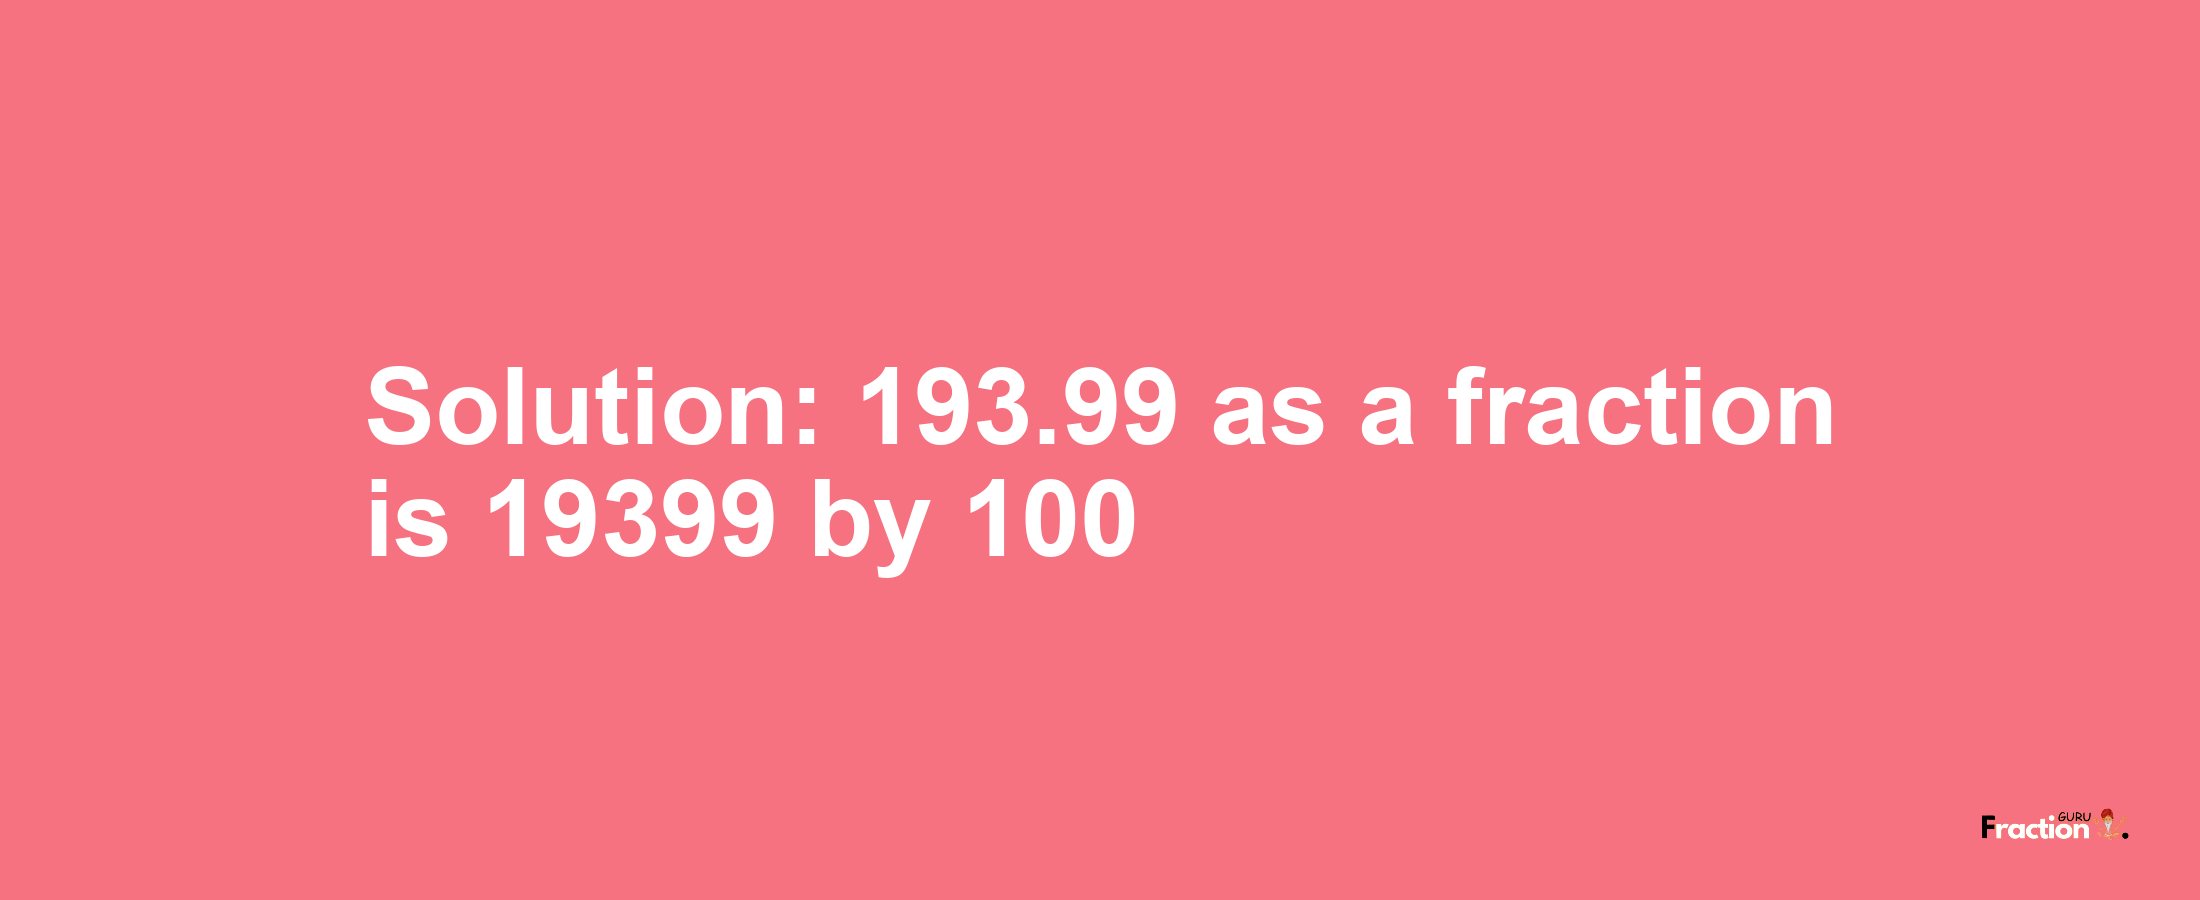 Solution:193.99 as a fraction is 19399/100